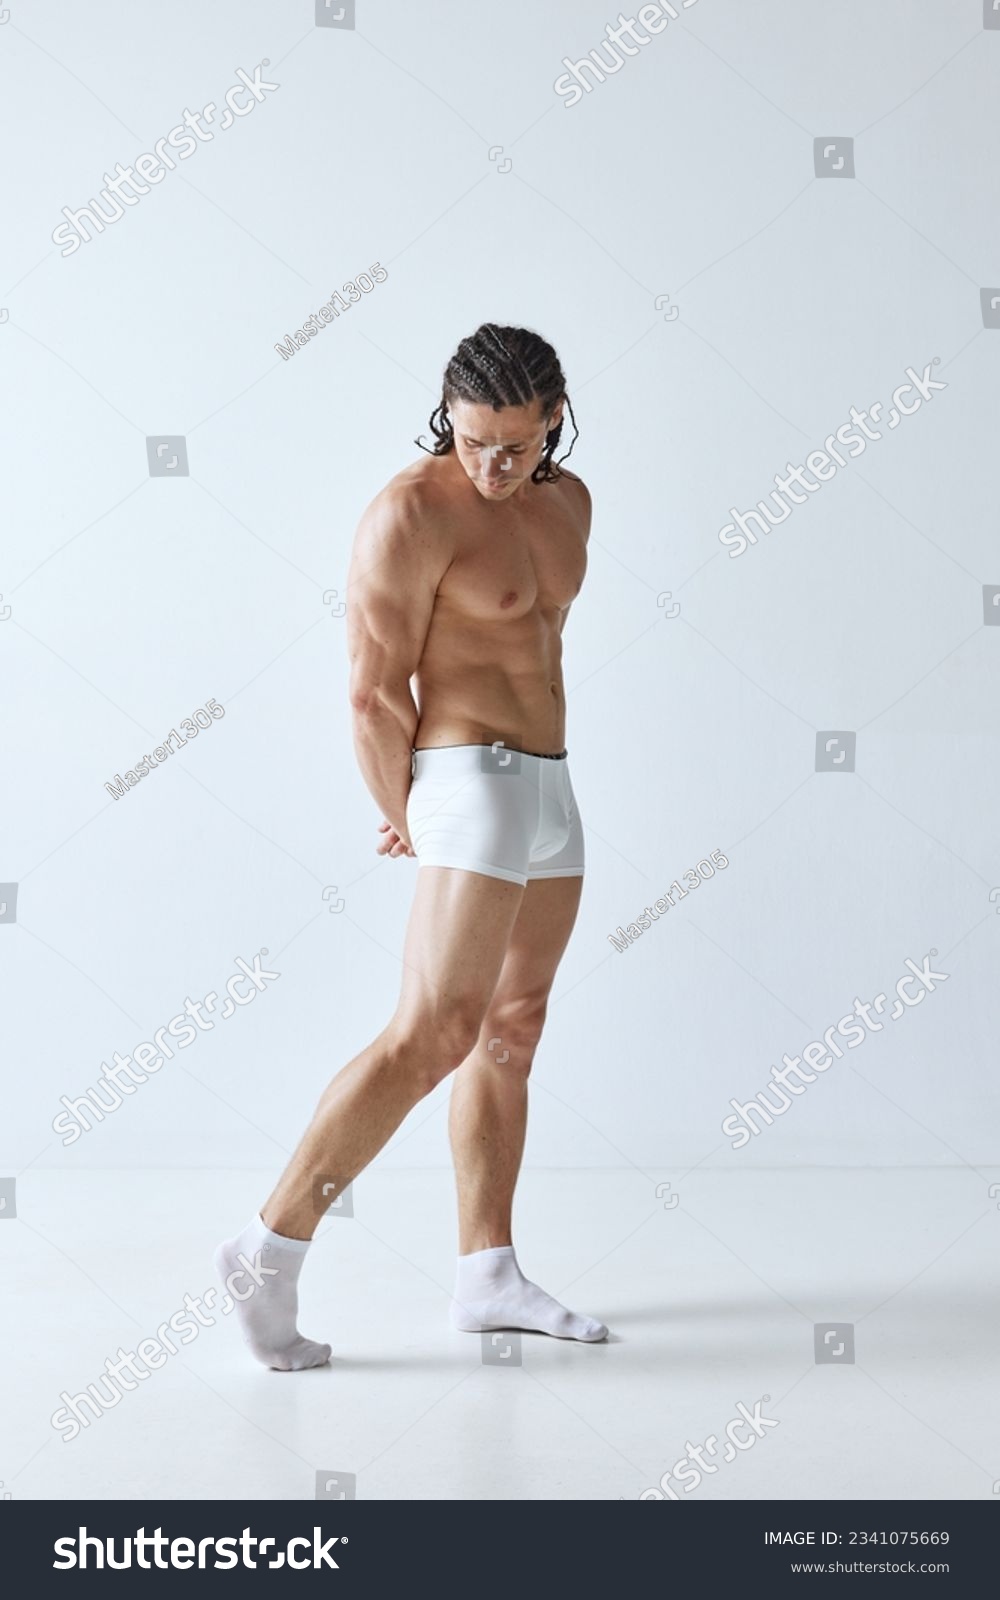 Full-length portrait of handsome mature man with muscular strong body standing shirtless in boxers against grey background. Concept of men's beauty, body care, sport, wellness, healthy lifestyle, ad #2341075669